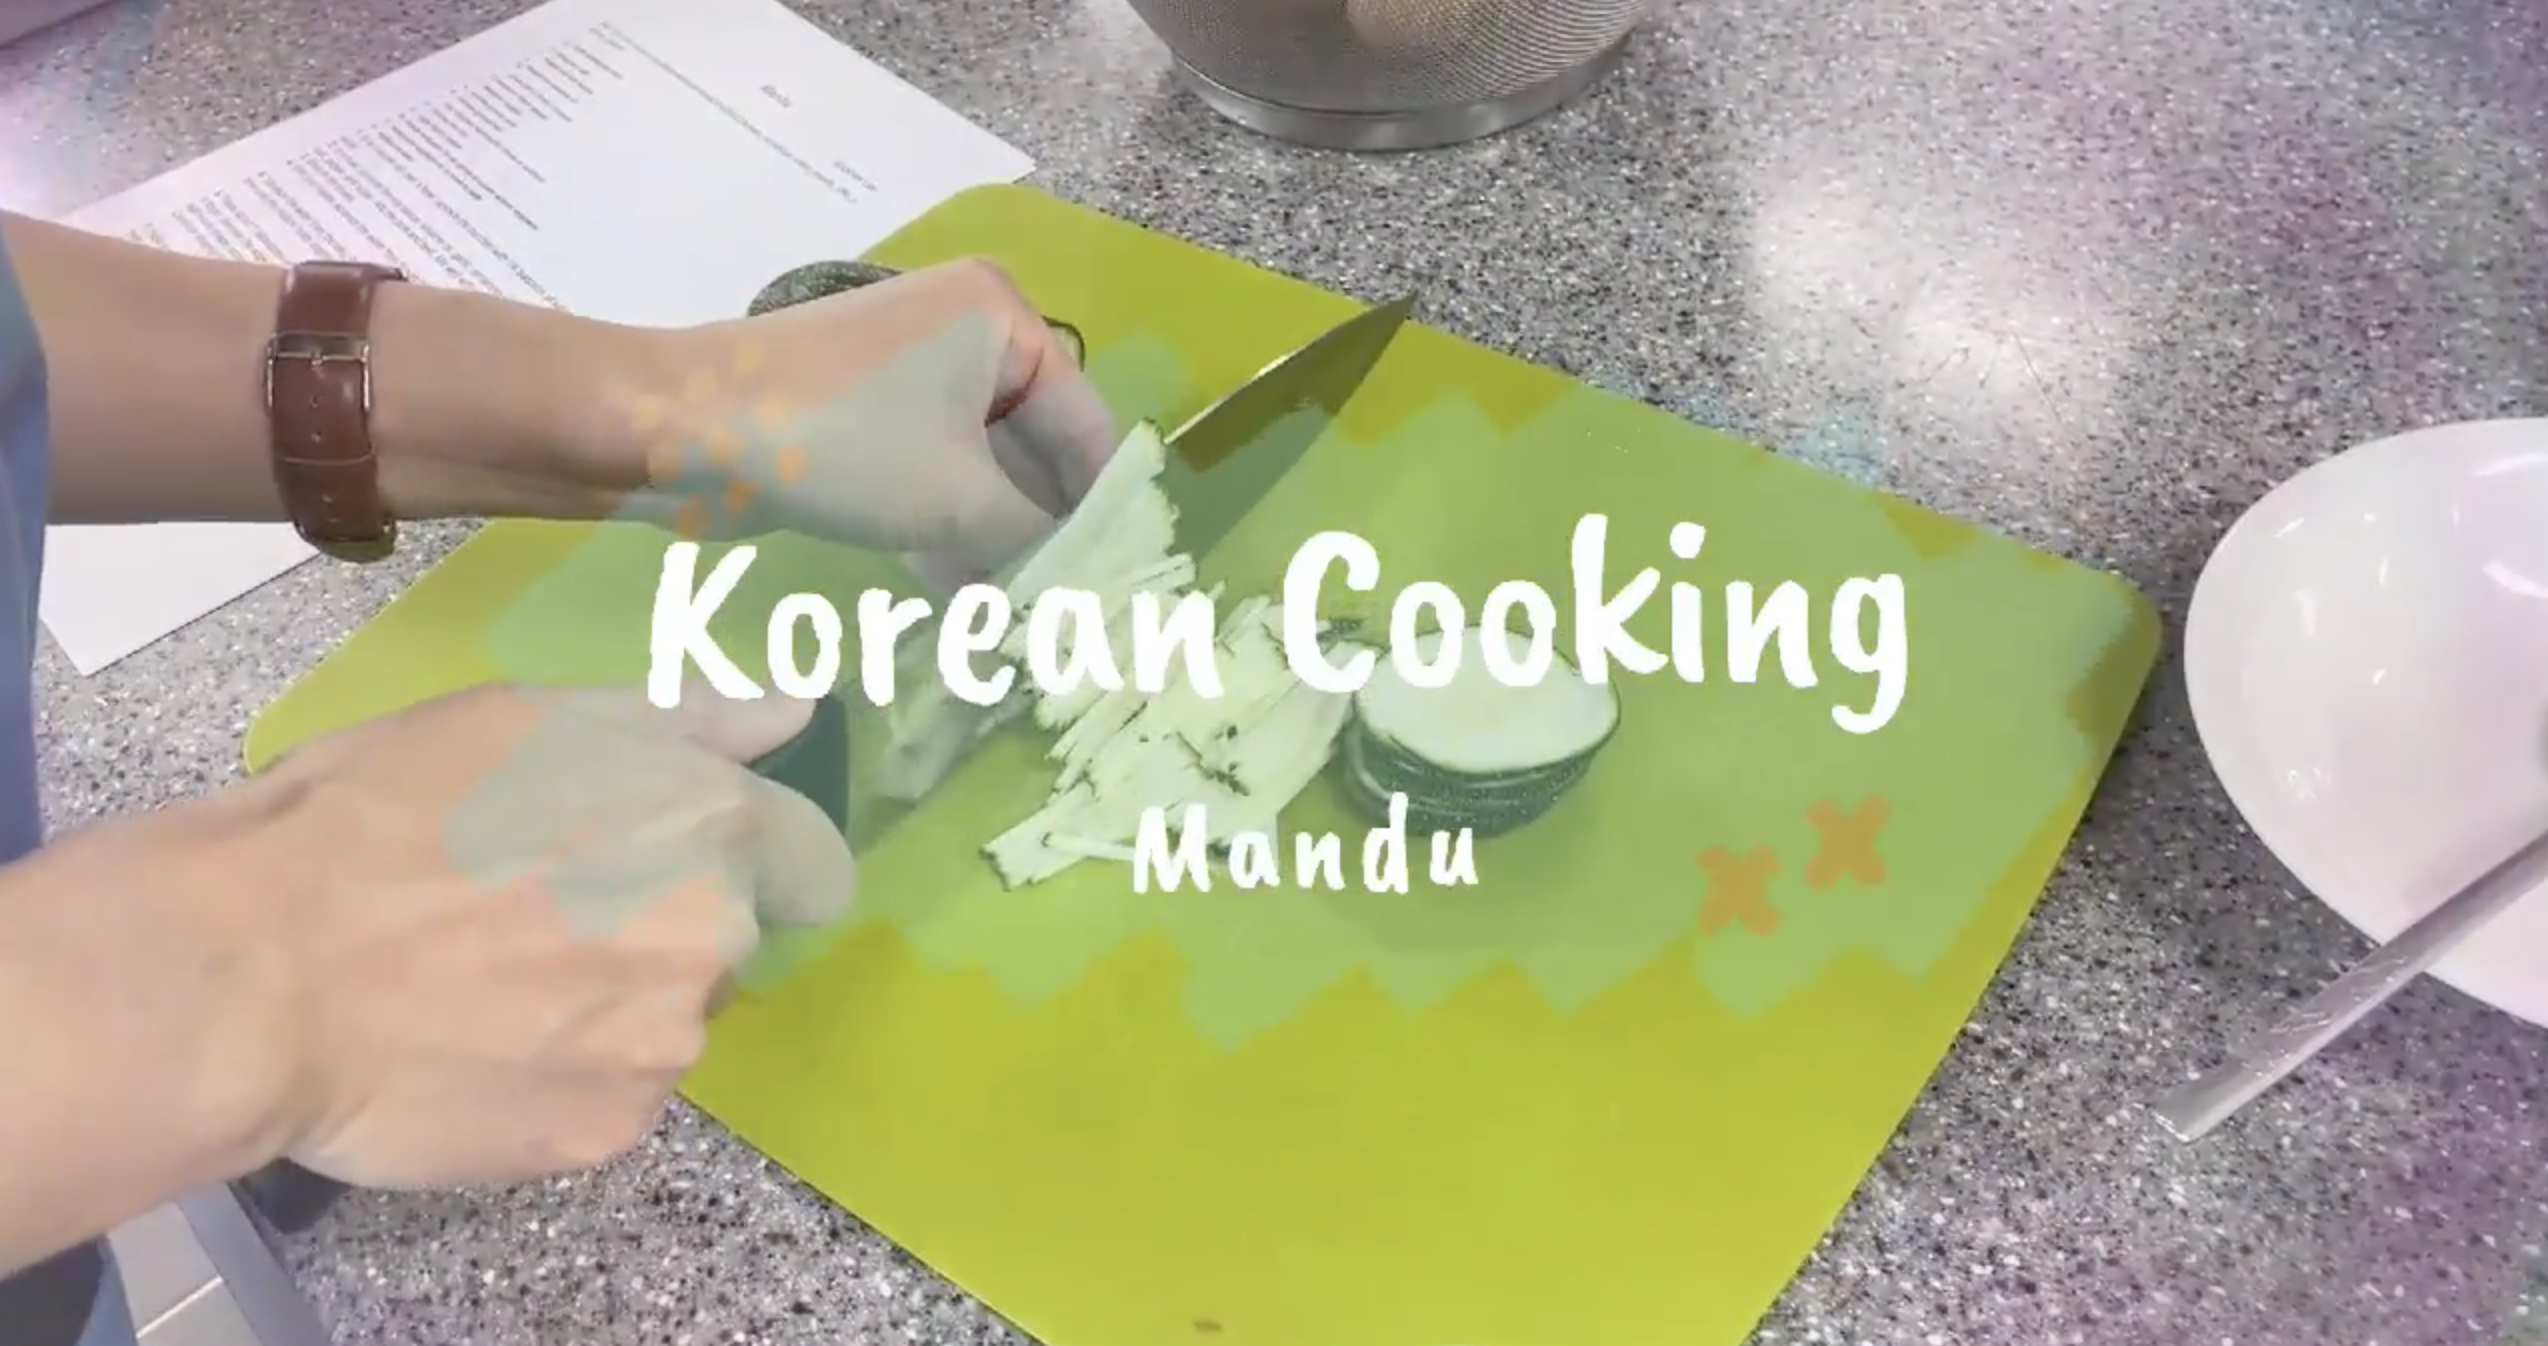 K-Food cooking featured